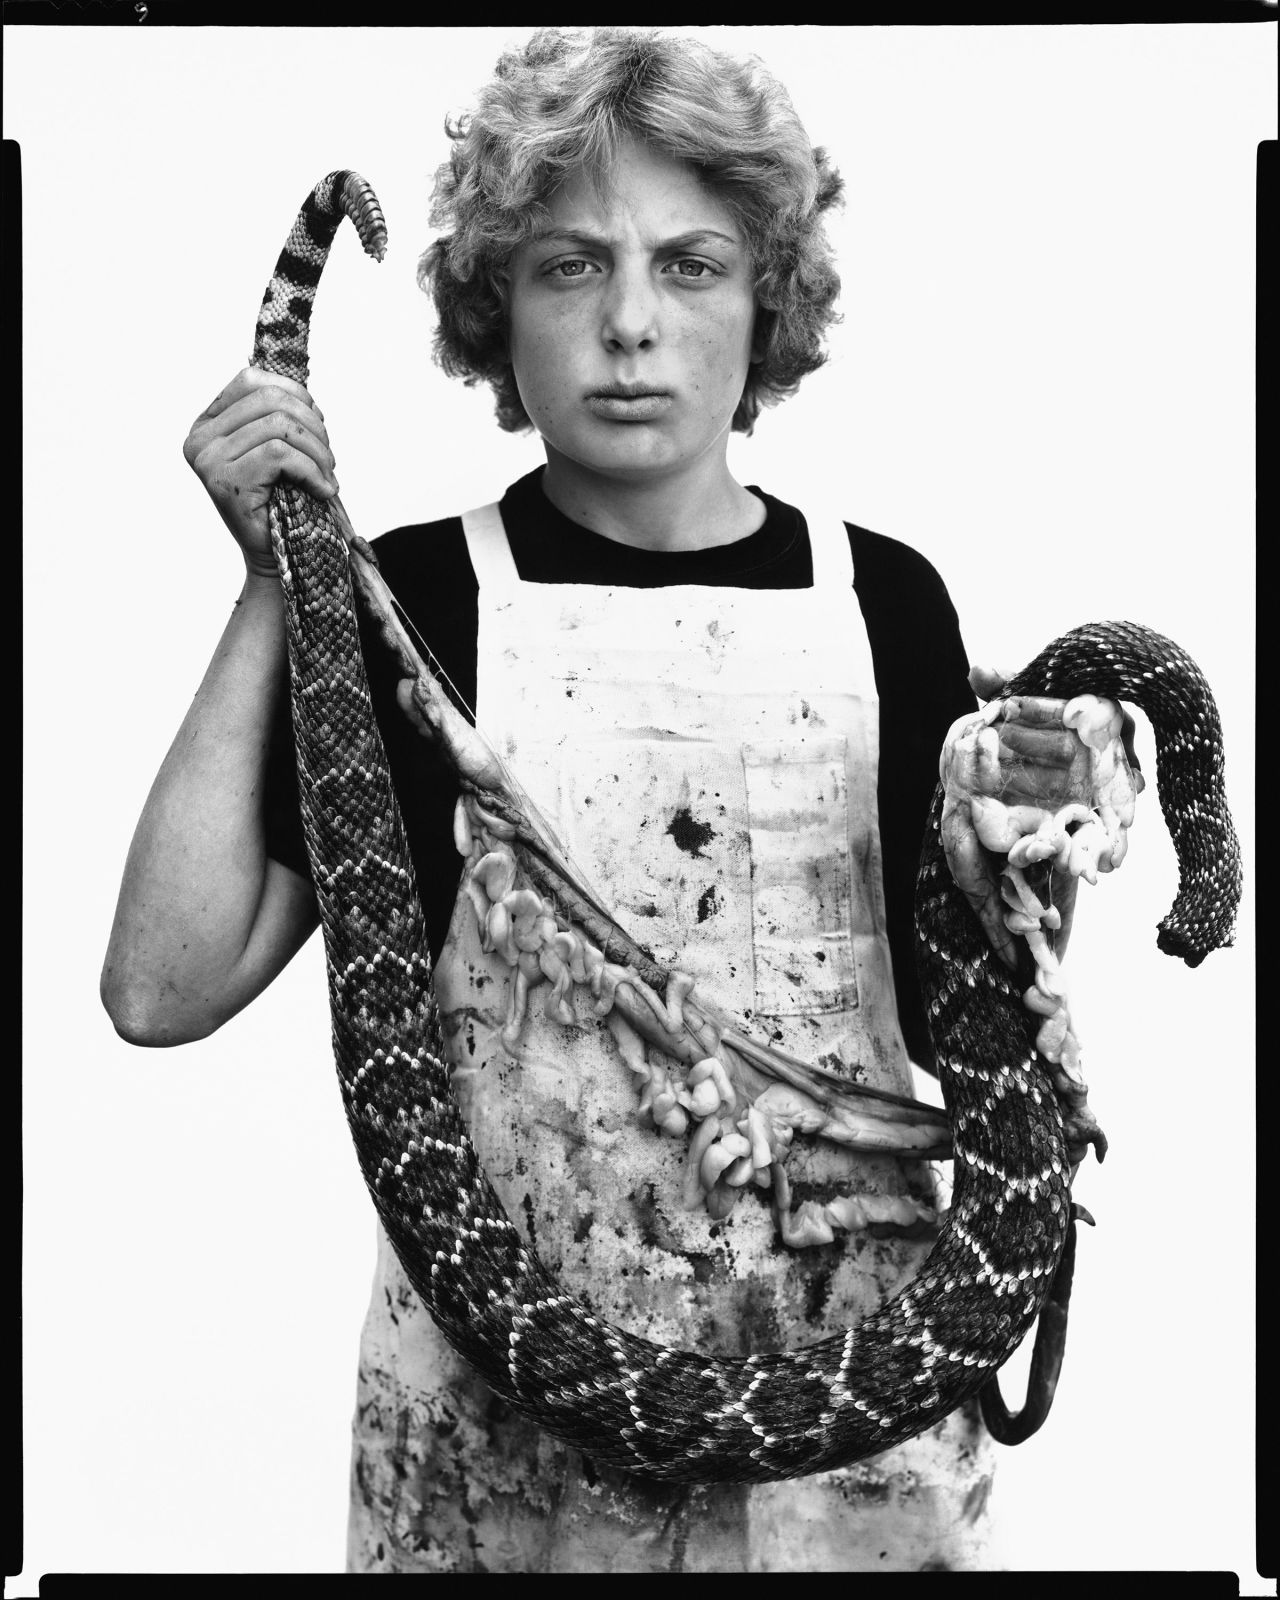 Fashion designer Miuccia Prada selected this image of Boyd Fortin, a teenaged rattlesnake skinner from Texas, taken in 1979. "The power of Richard Avedon's work for me is always in its study of humanity, its strengths and fragilities, sometimes raw but always honest," Prada said. "Avedon's work gave power and
value to people who often went unnoticed. He celebrated unanticipated beauty."